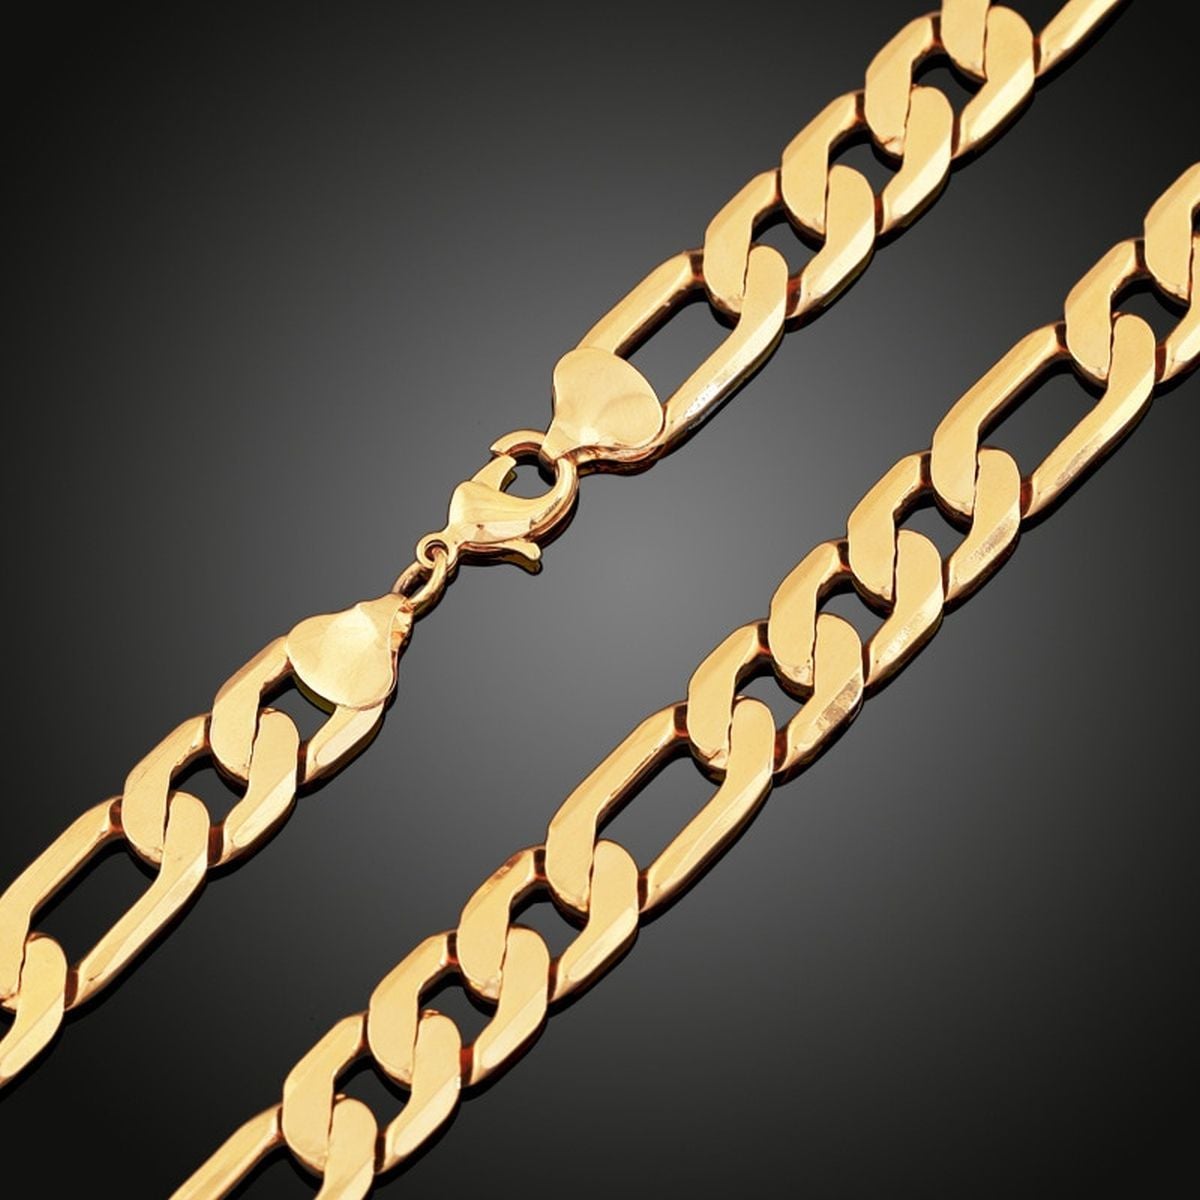 4Mm Figaro Curb 18K Gold Stainless Steel 20" Chain Necklace For Men Boys